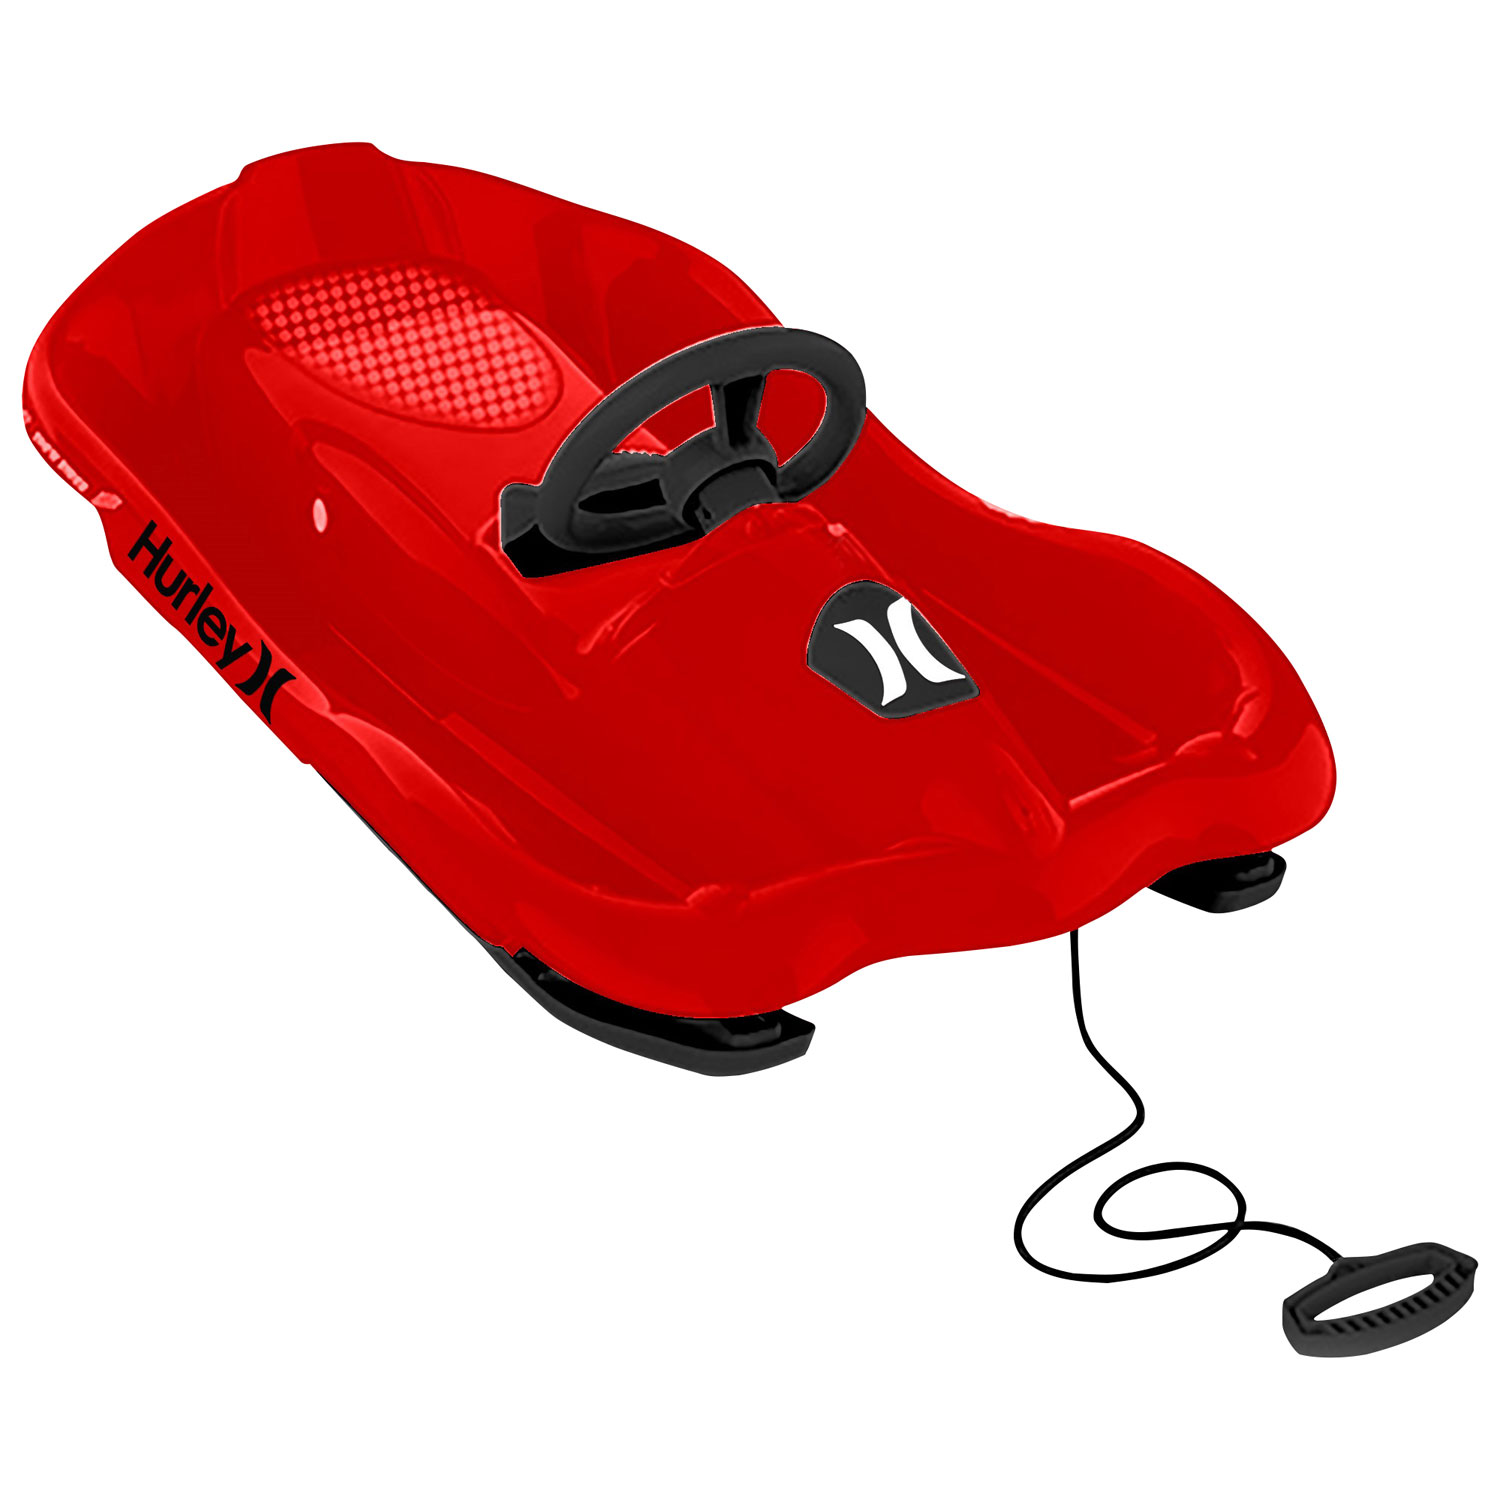 Hurley Kids Steerable Snow Sled - Red